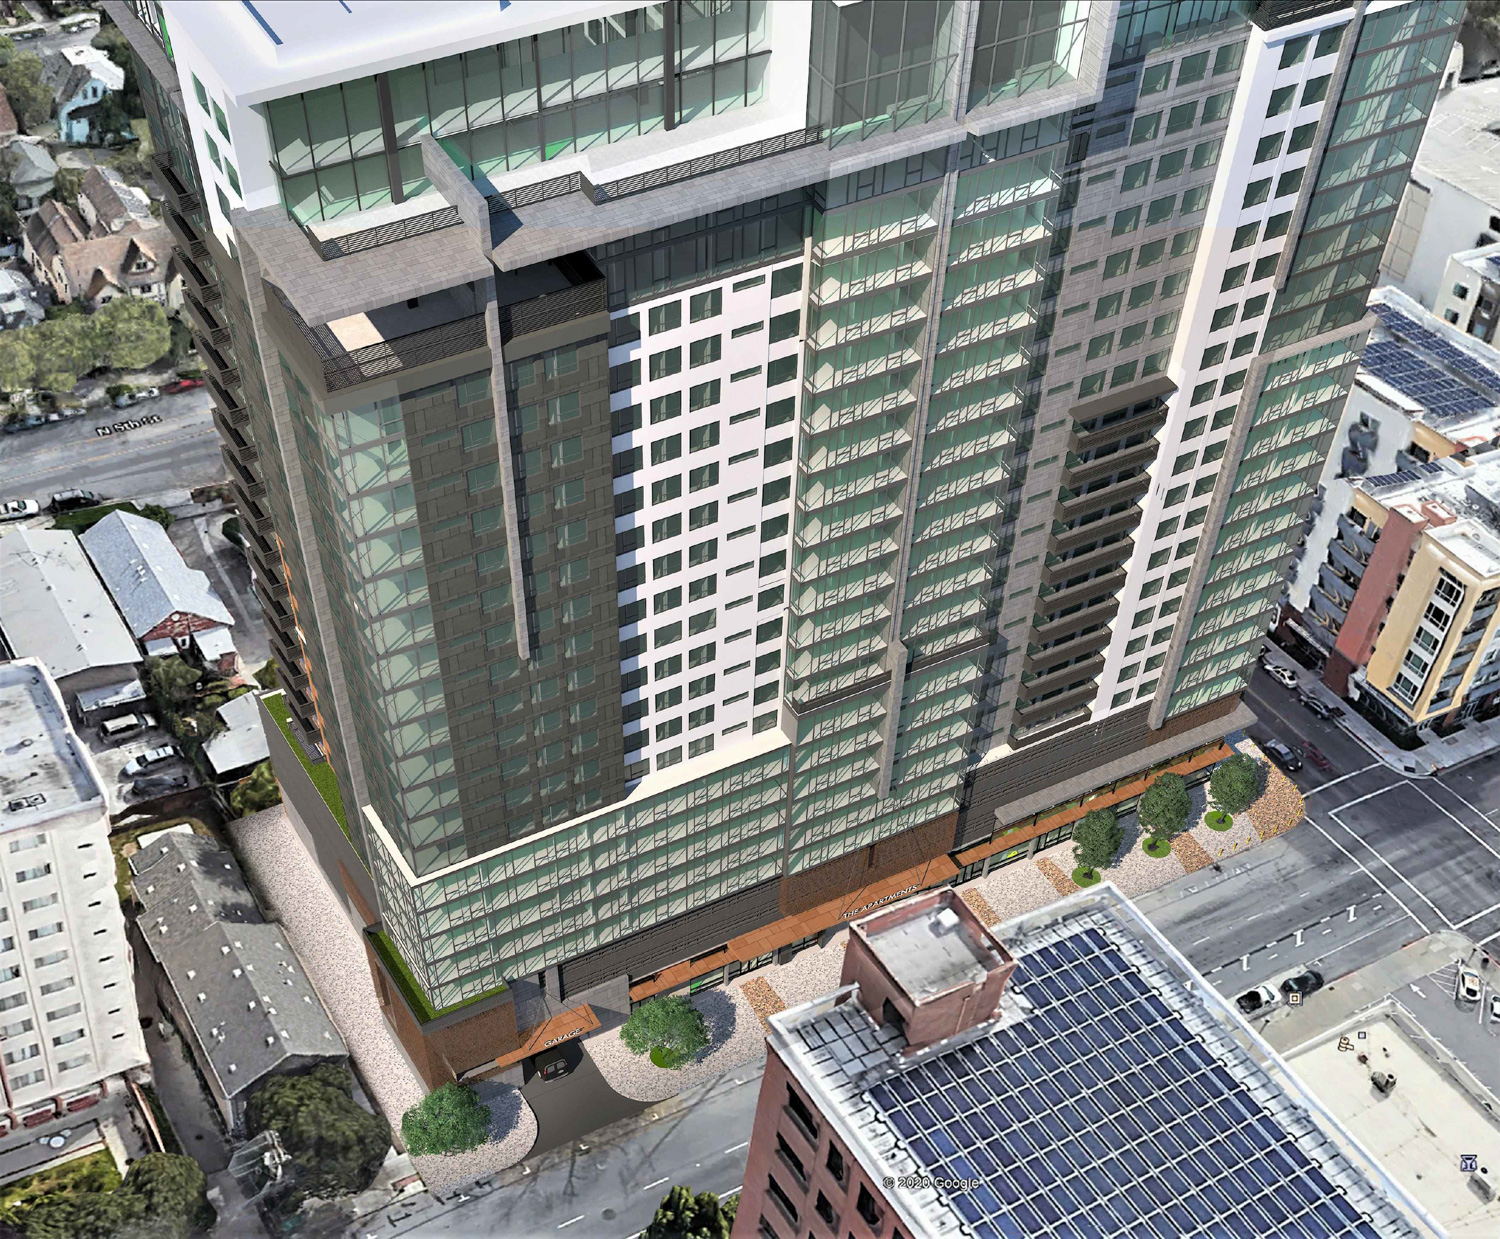 Student Housing at 100 North 4th Street aerial view looking towards the 4th Street lobby, rendering by LPMD Architects